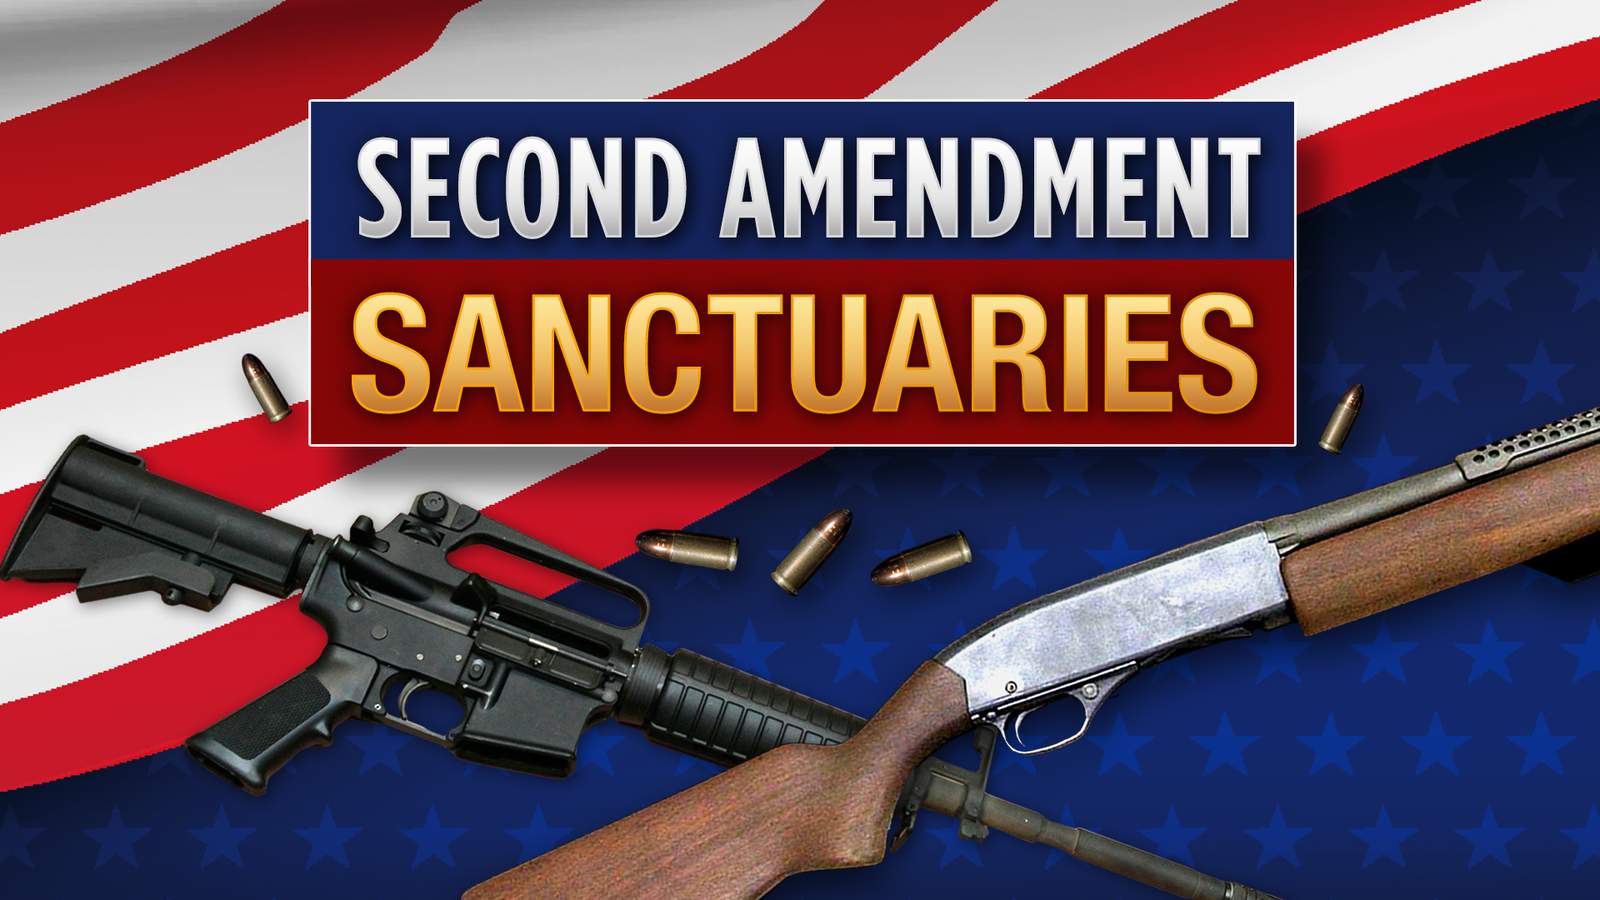 List of Second Amendment sanctuaries in Virginia and where it’s being discussed